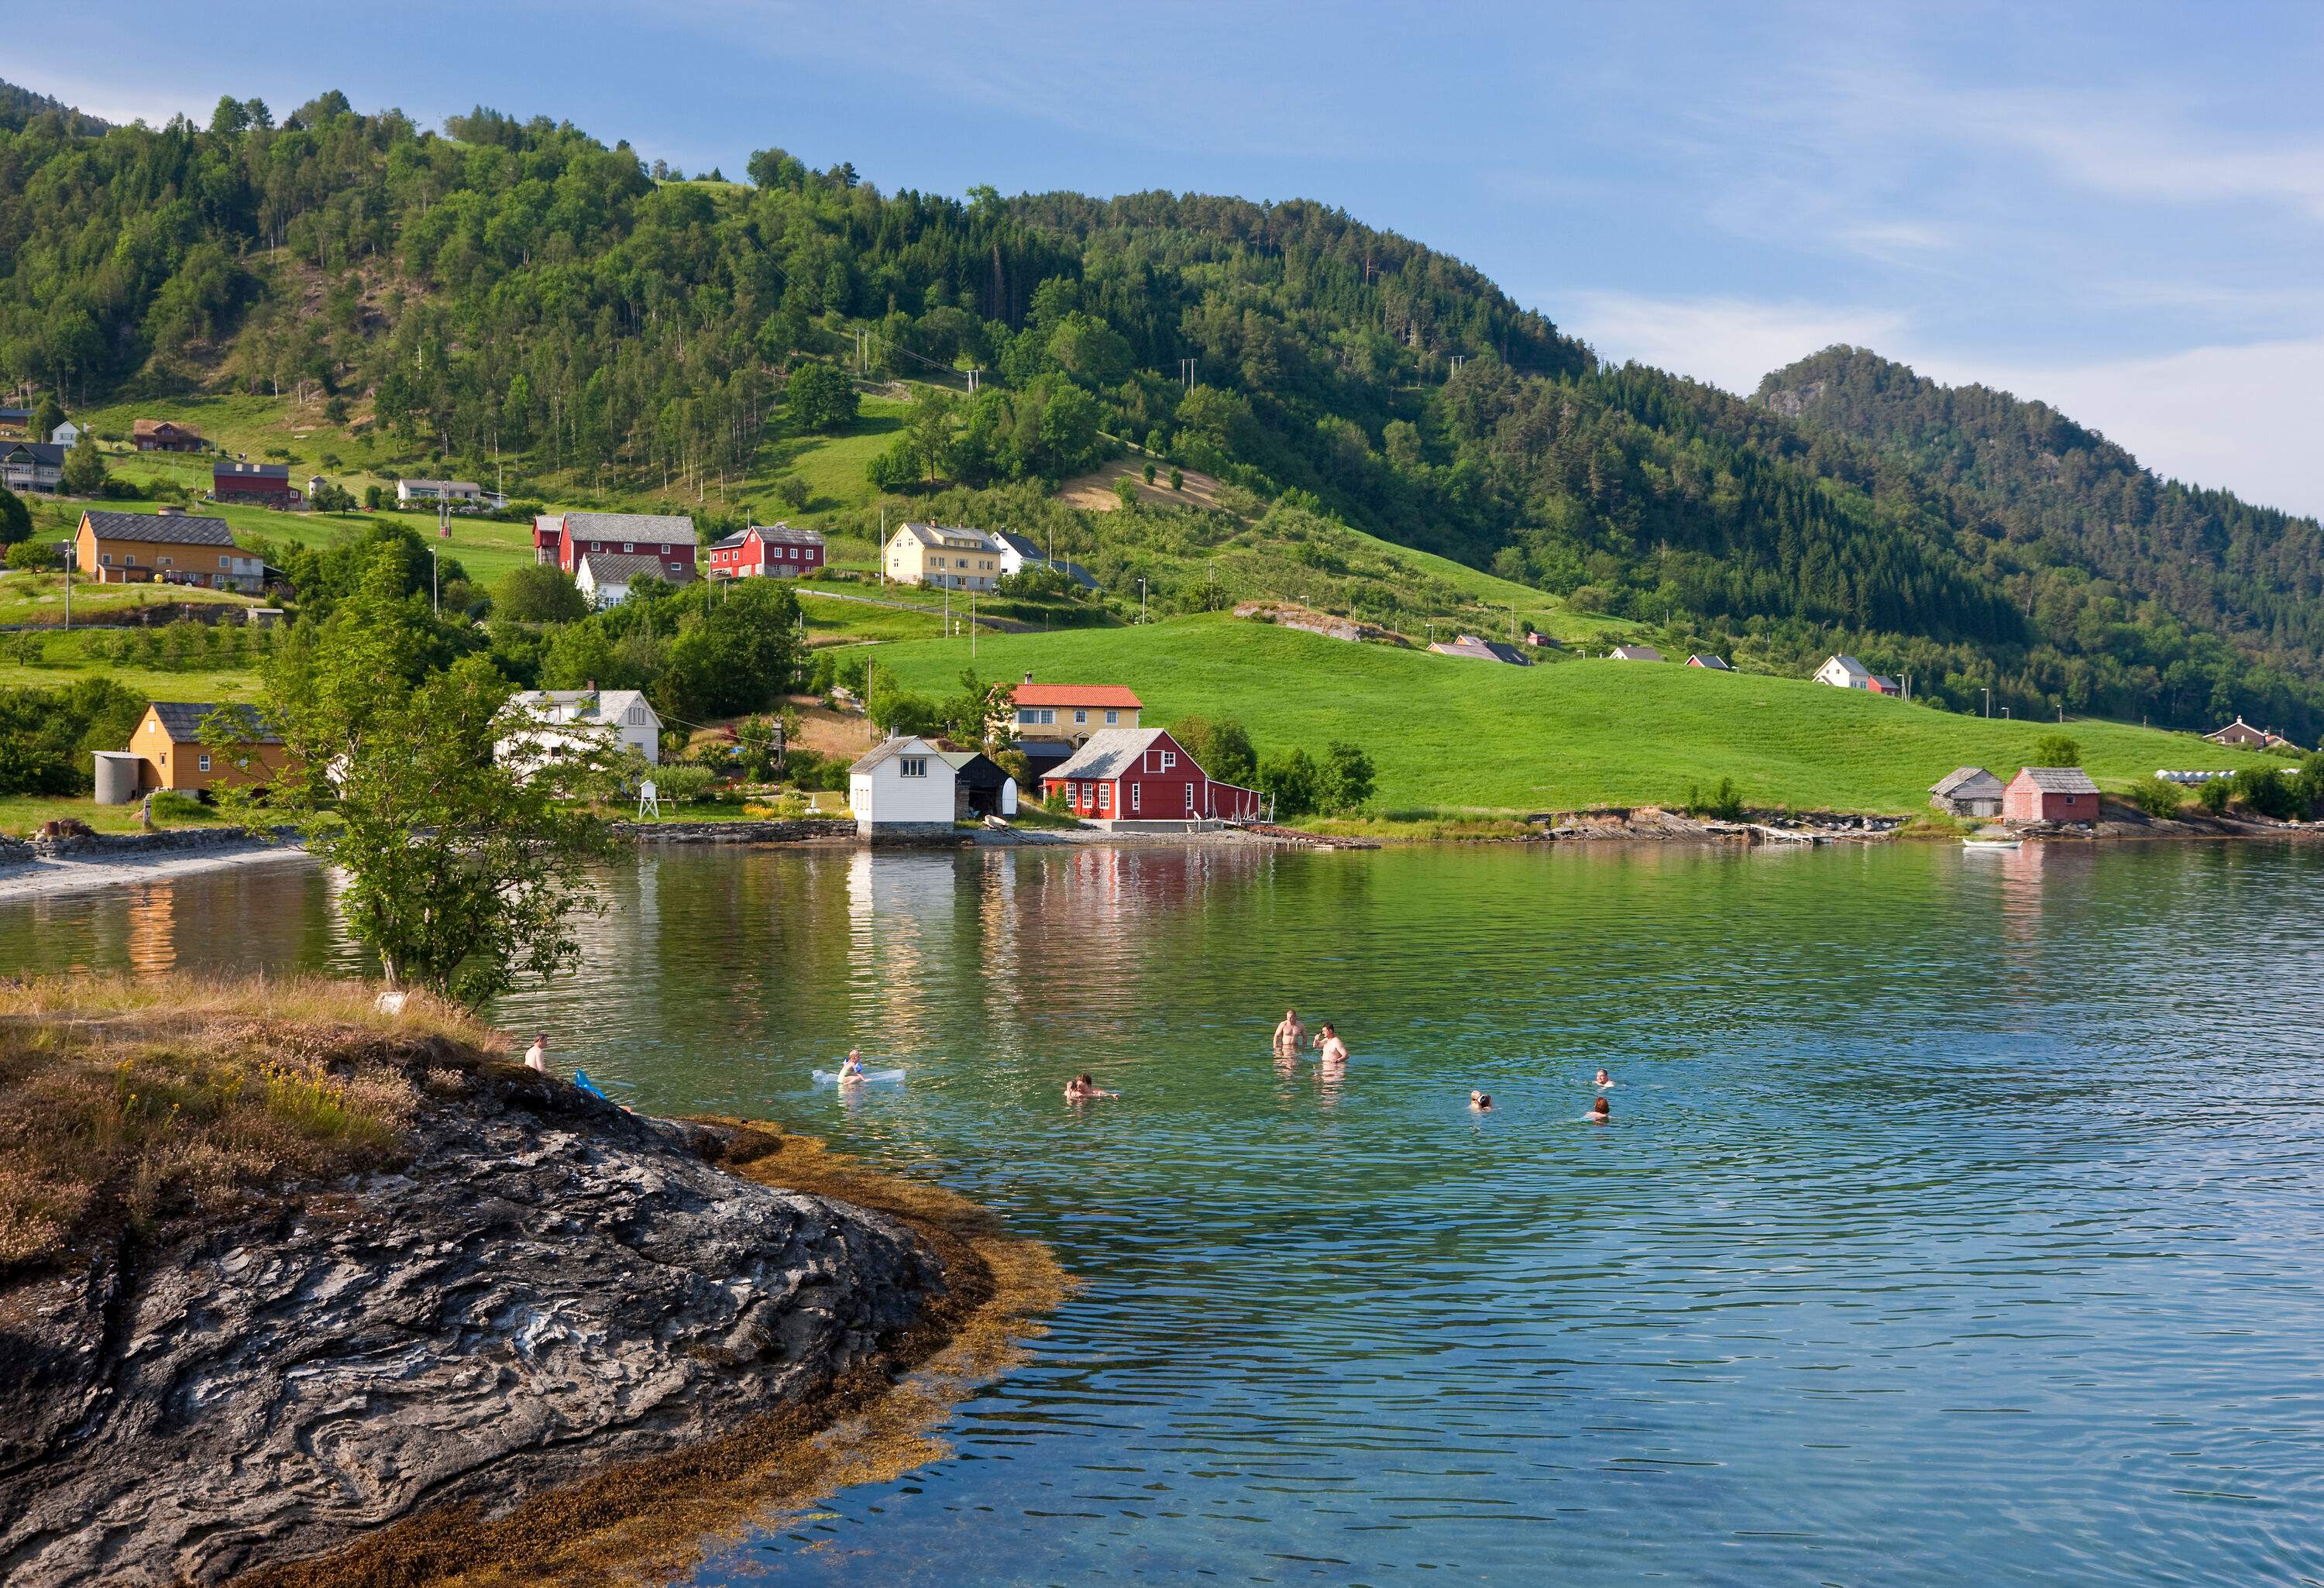 A group of people swimming in a lake along a village with houses perched on a grassy hill.